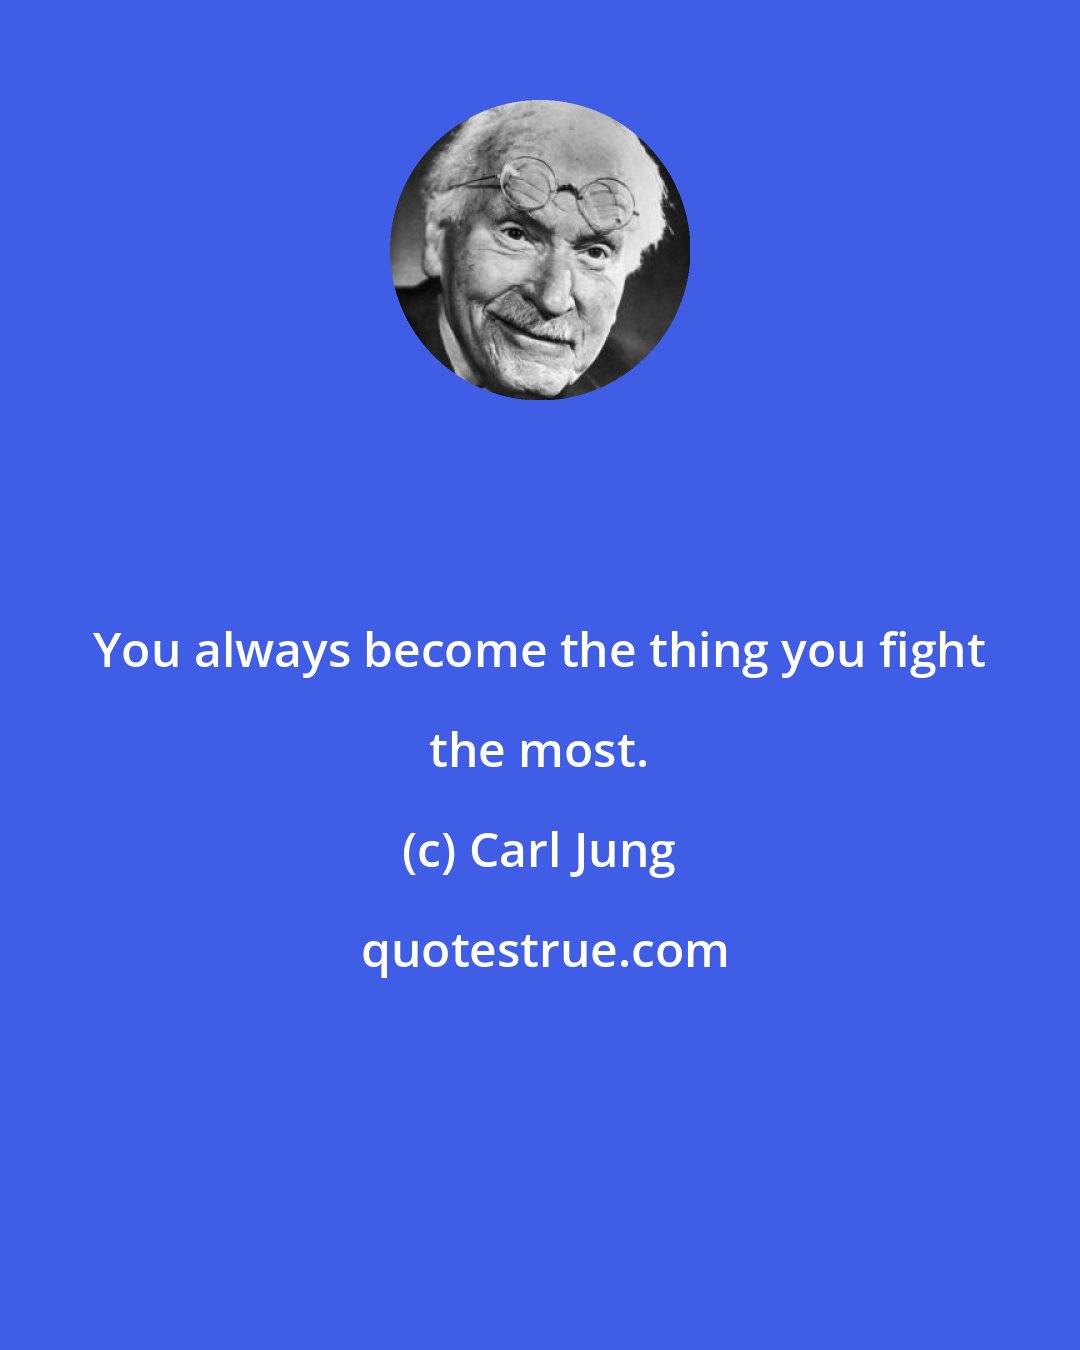 Carl Jung: You always become the thing you fight the most.